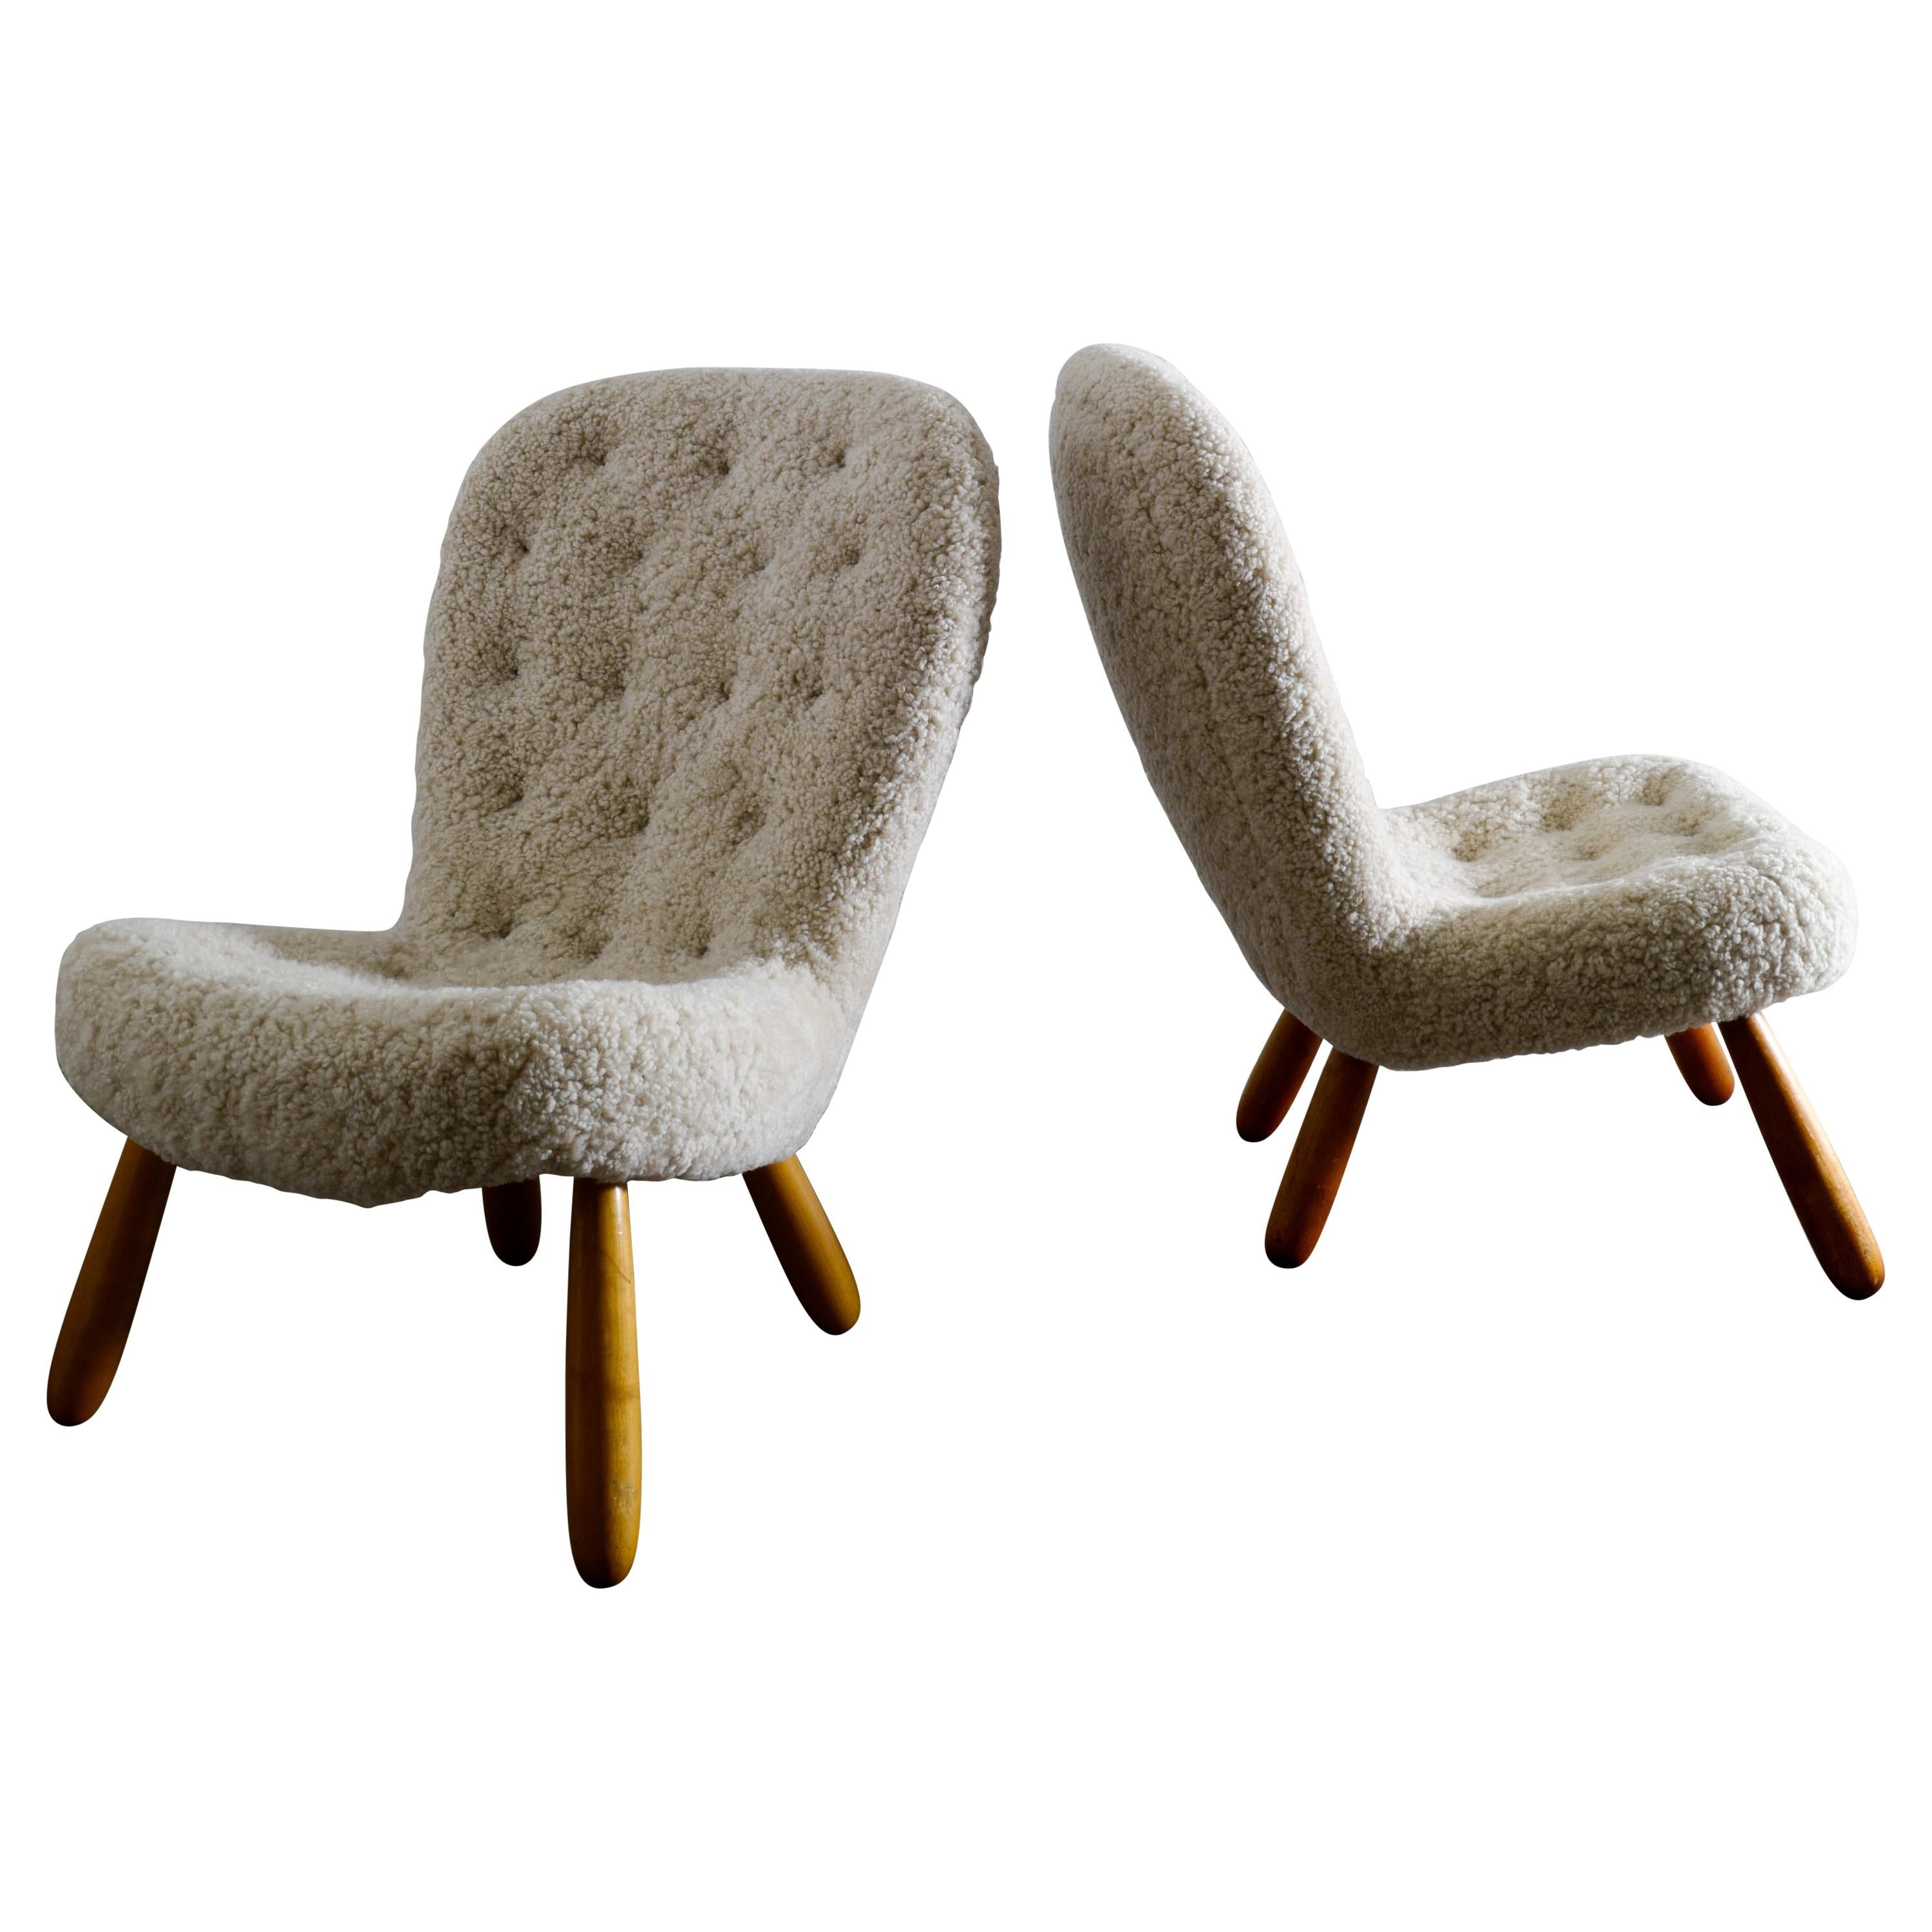 Philip Arctander Pair of "Clam Chairs" in Sheepskin Produced in Denmark, 1940s